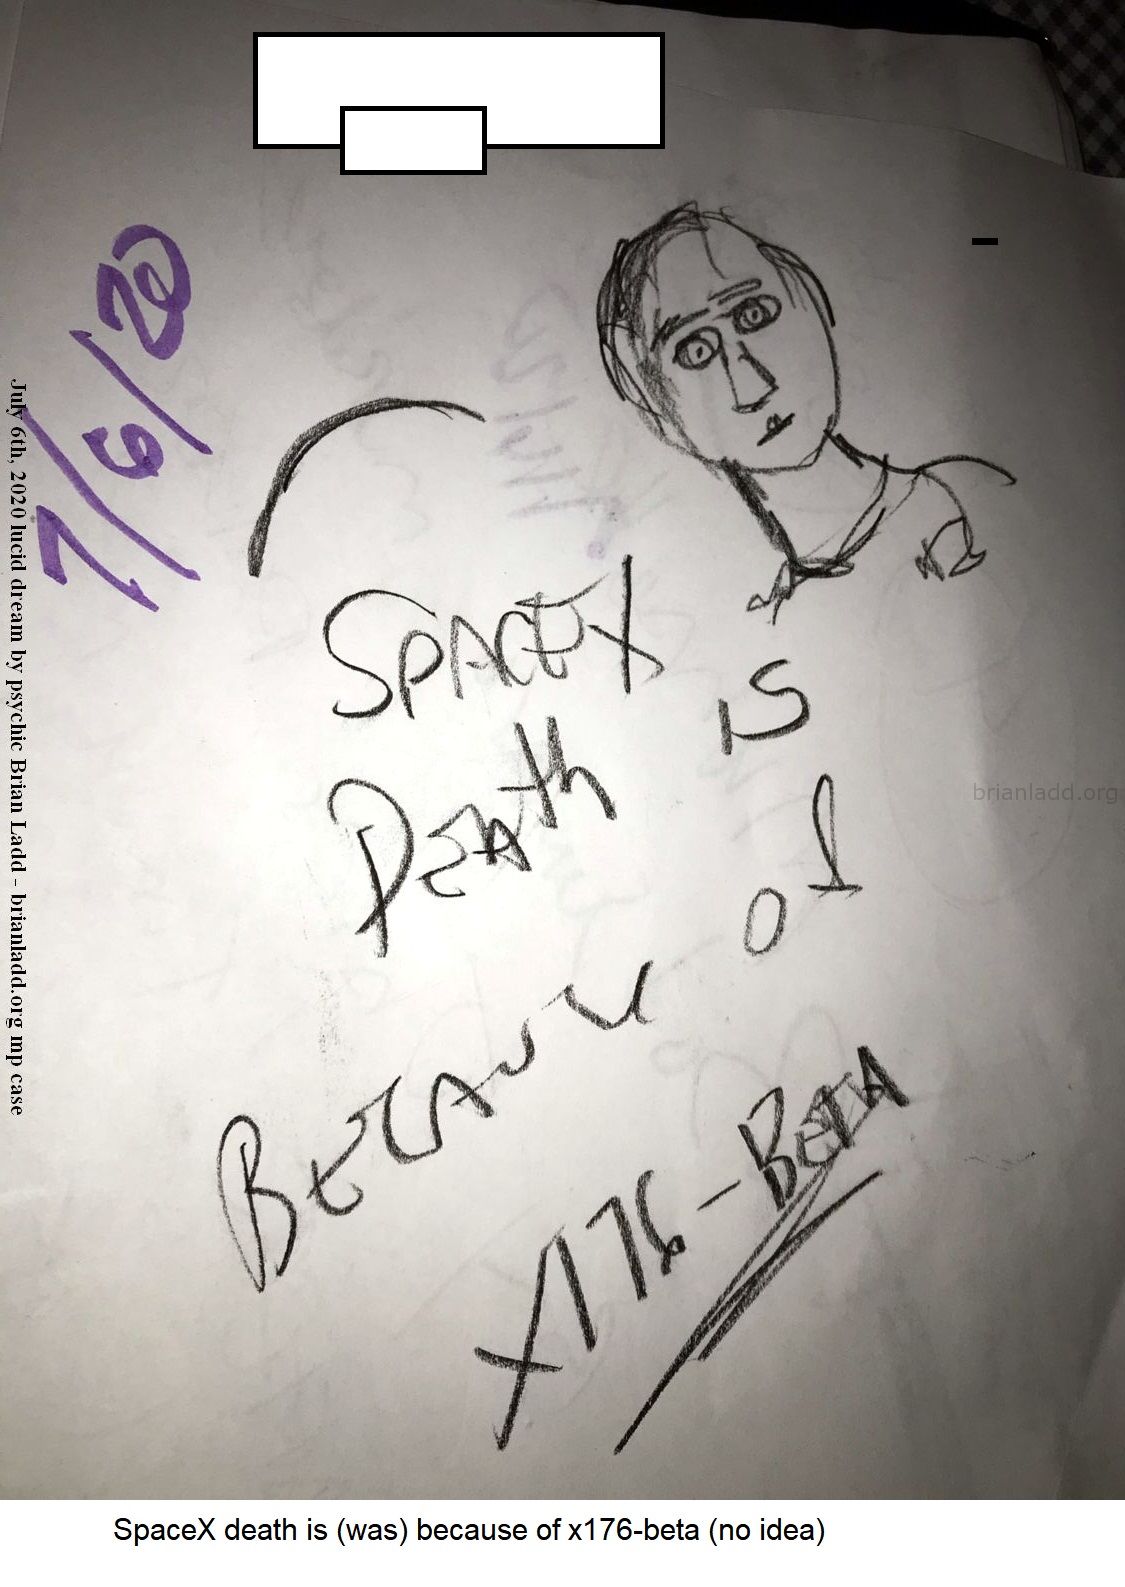 13265 6 July 2020 2 - Spacex Death Is (was) Because Of X176-Beta (no Idea)...
Spacex Death Is (was) Because Of X176-Beta (no Idea)
